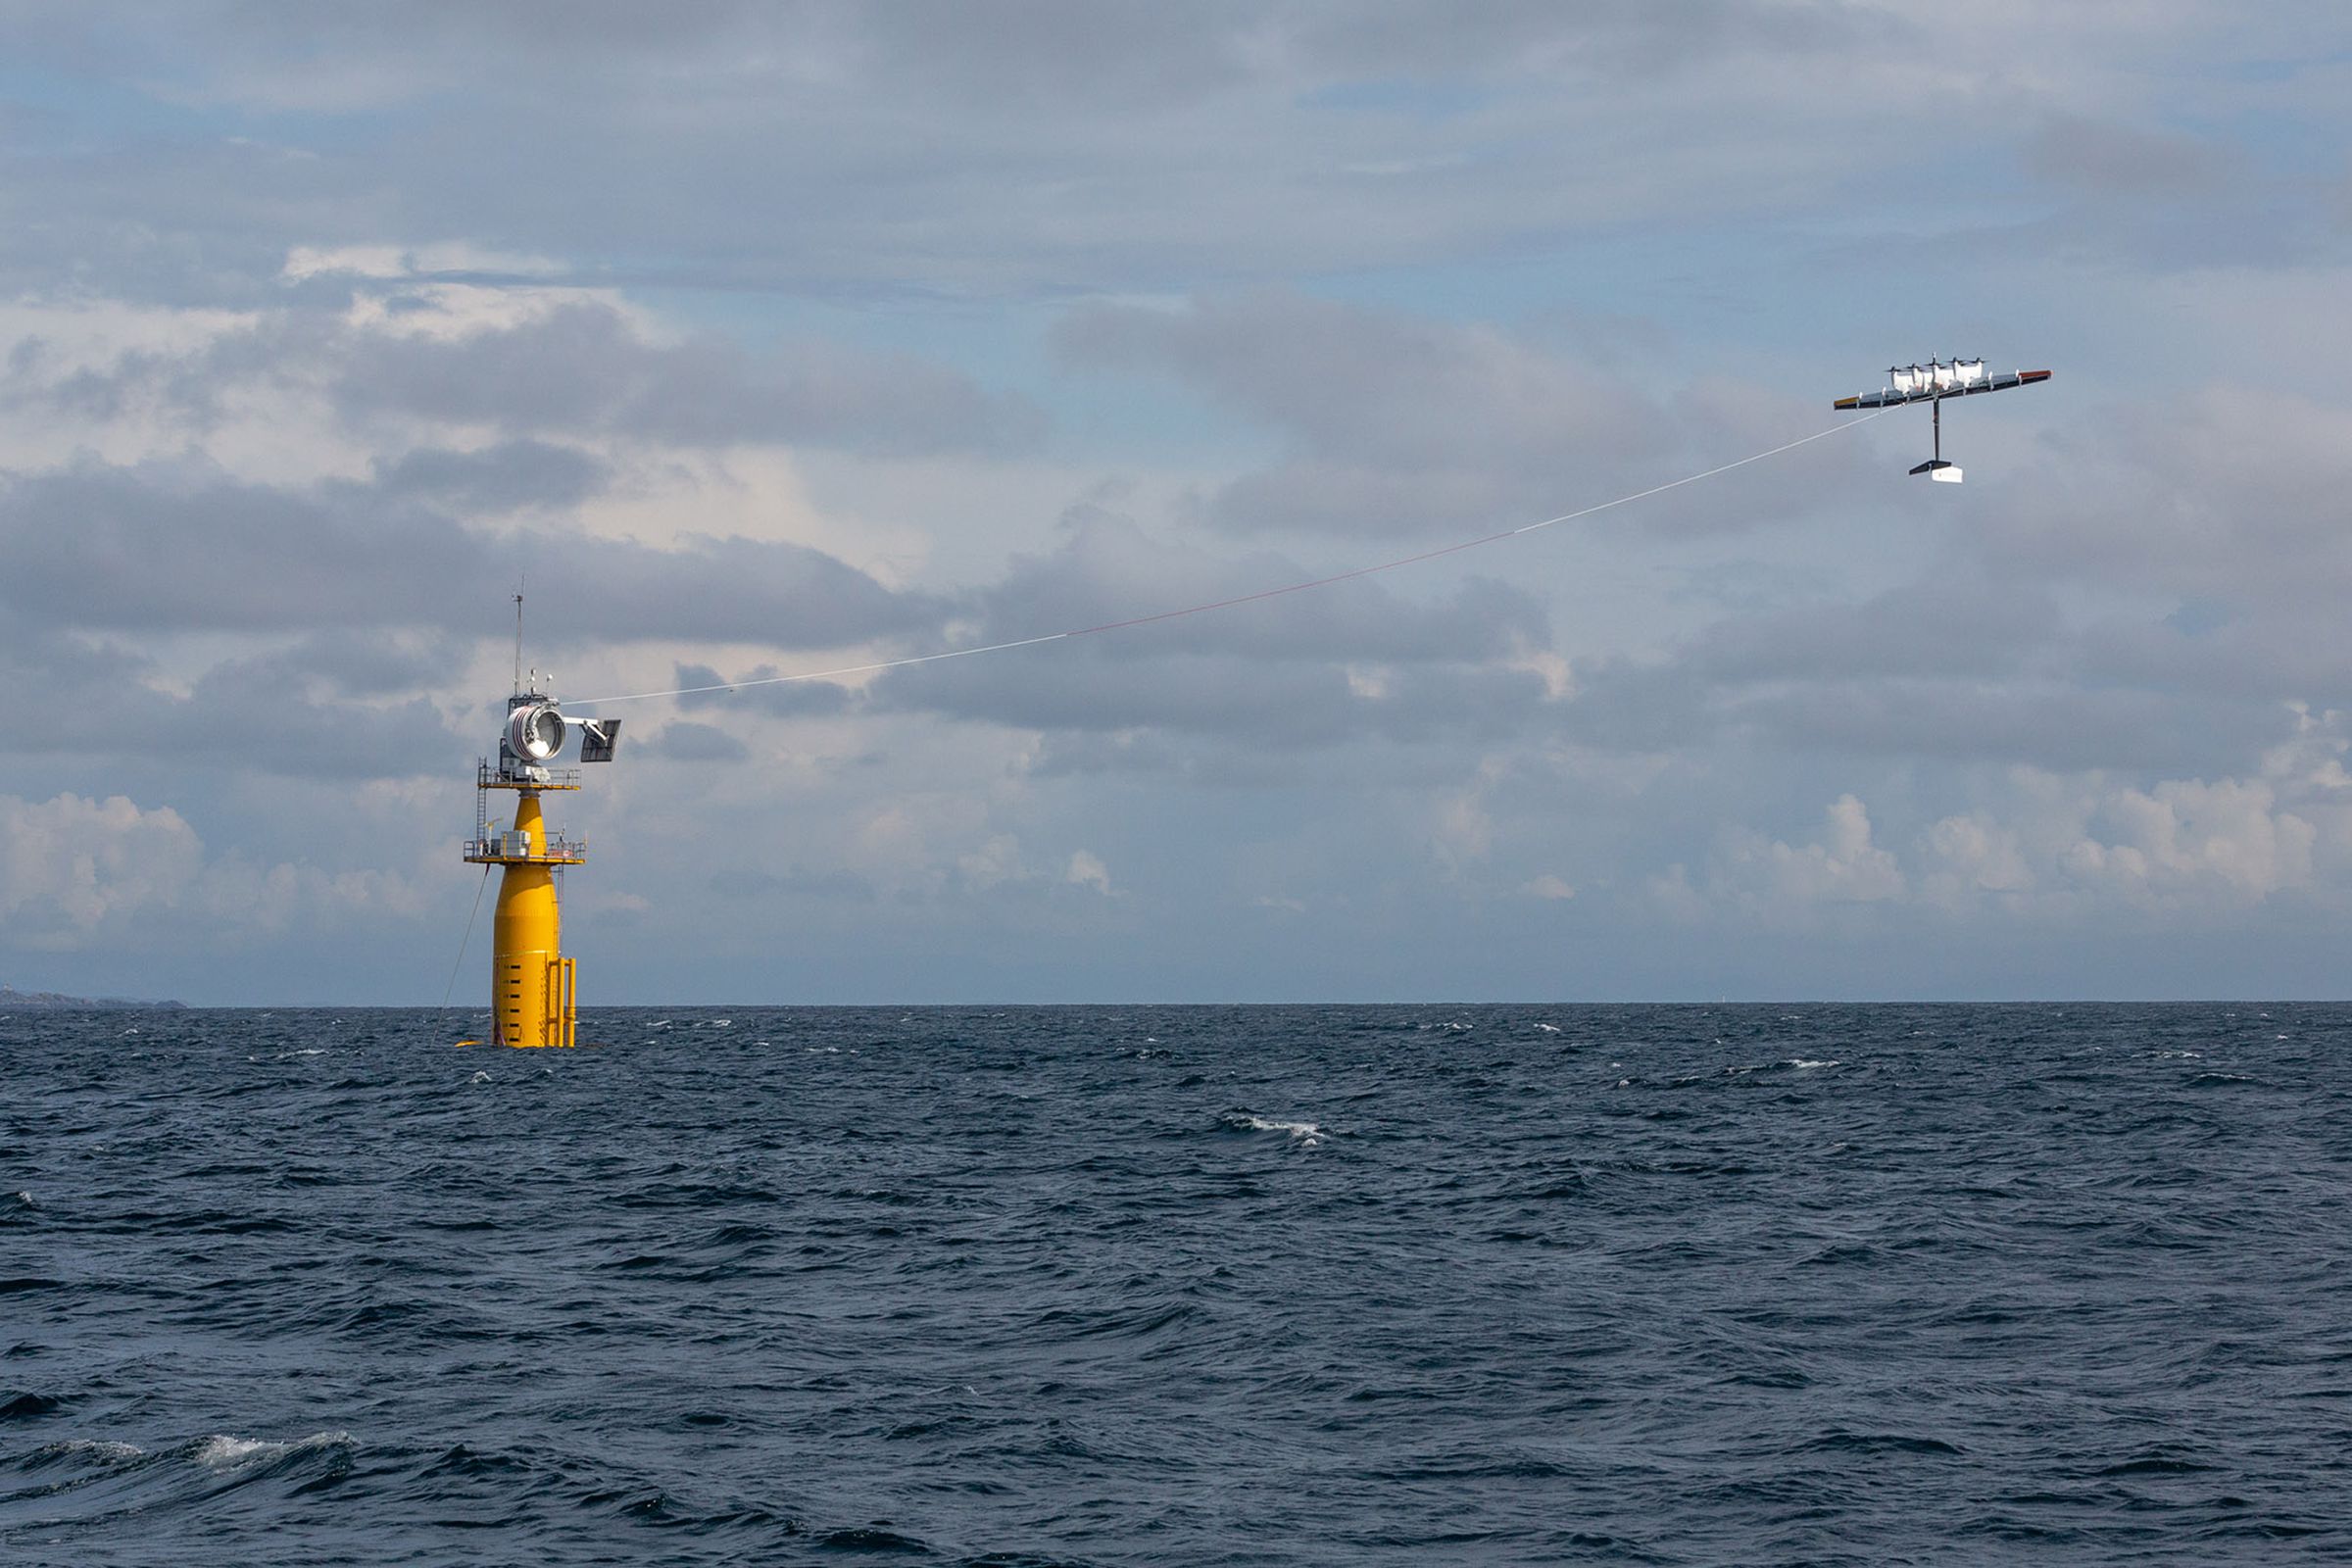 The kites are attached to buoys out at sea, and use turbines to generate power.